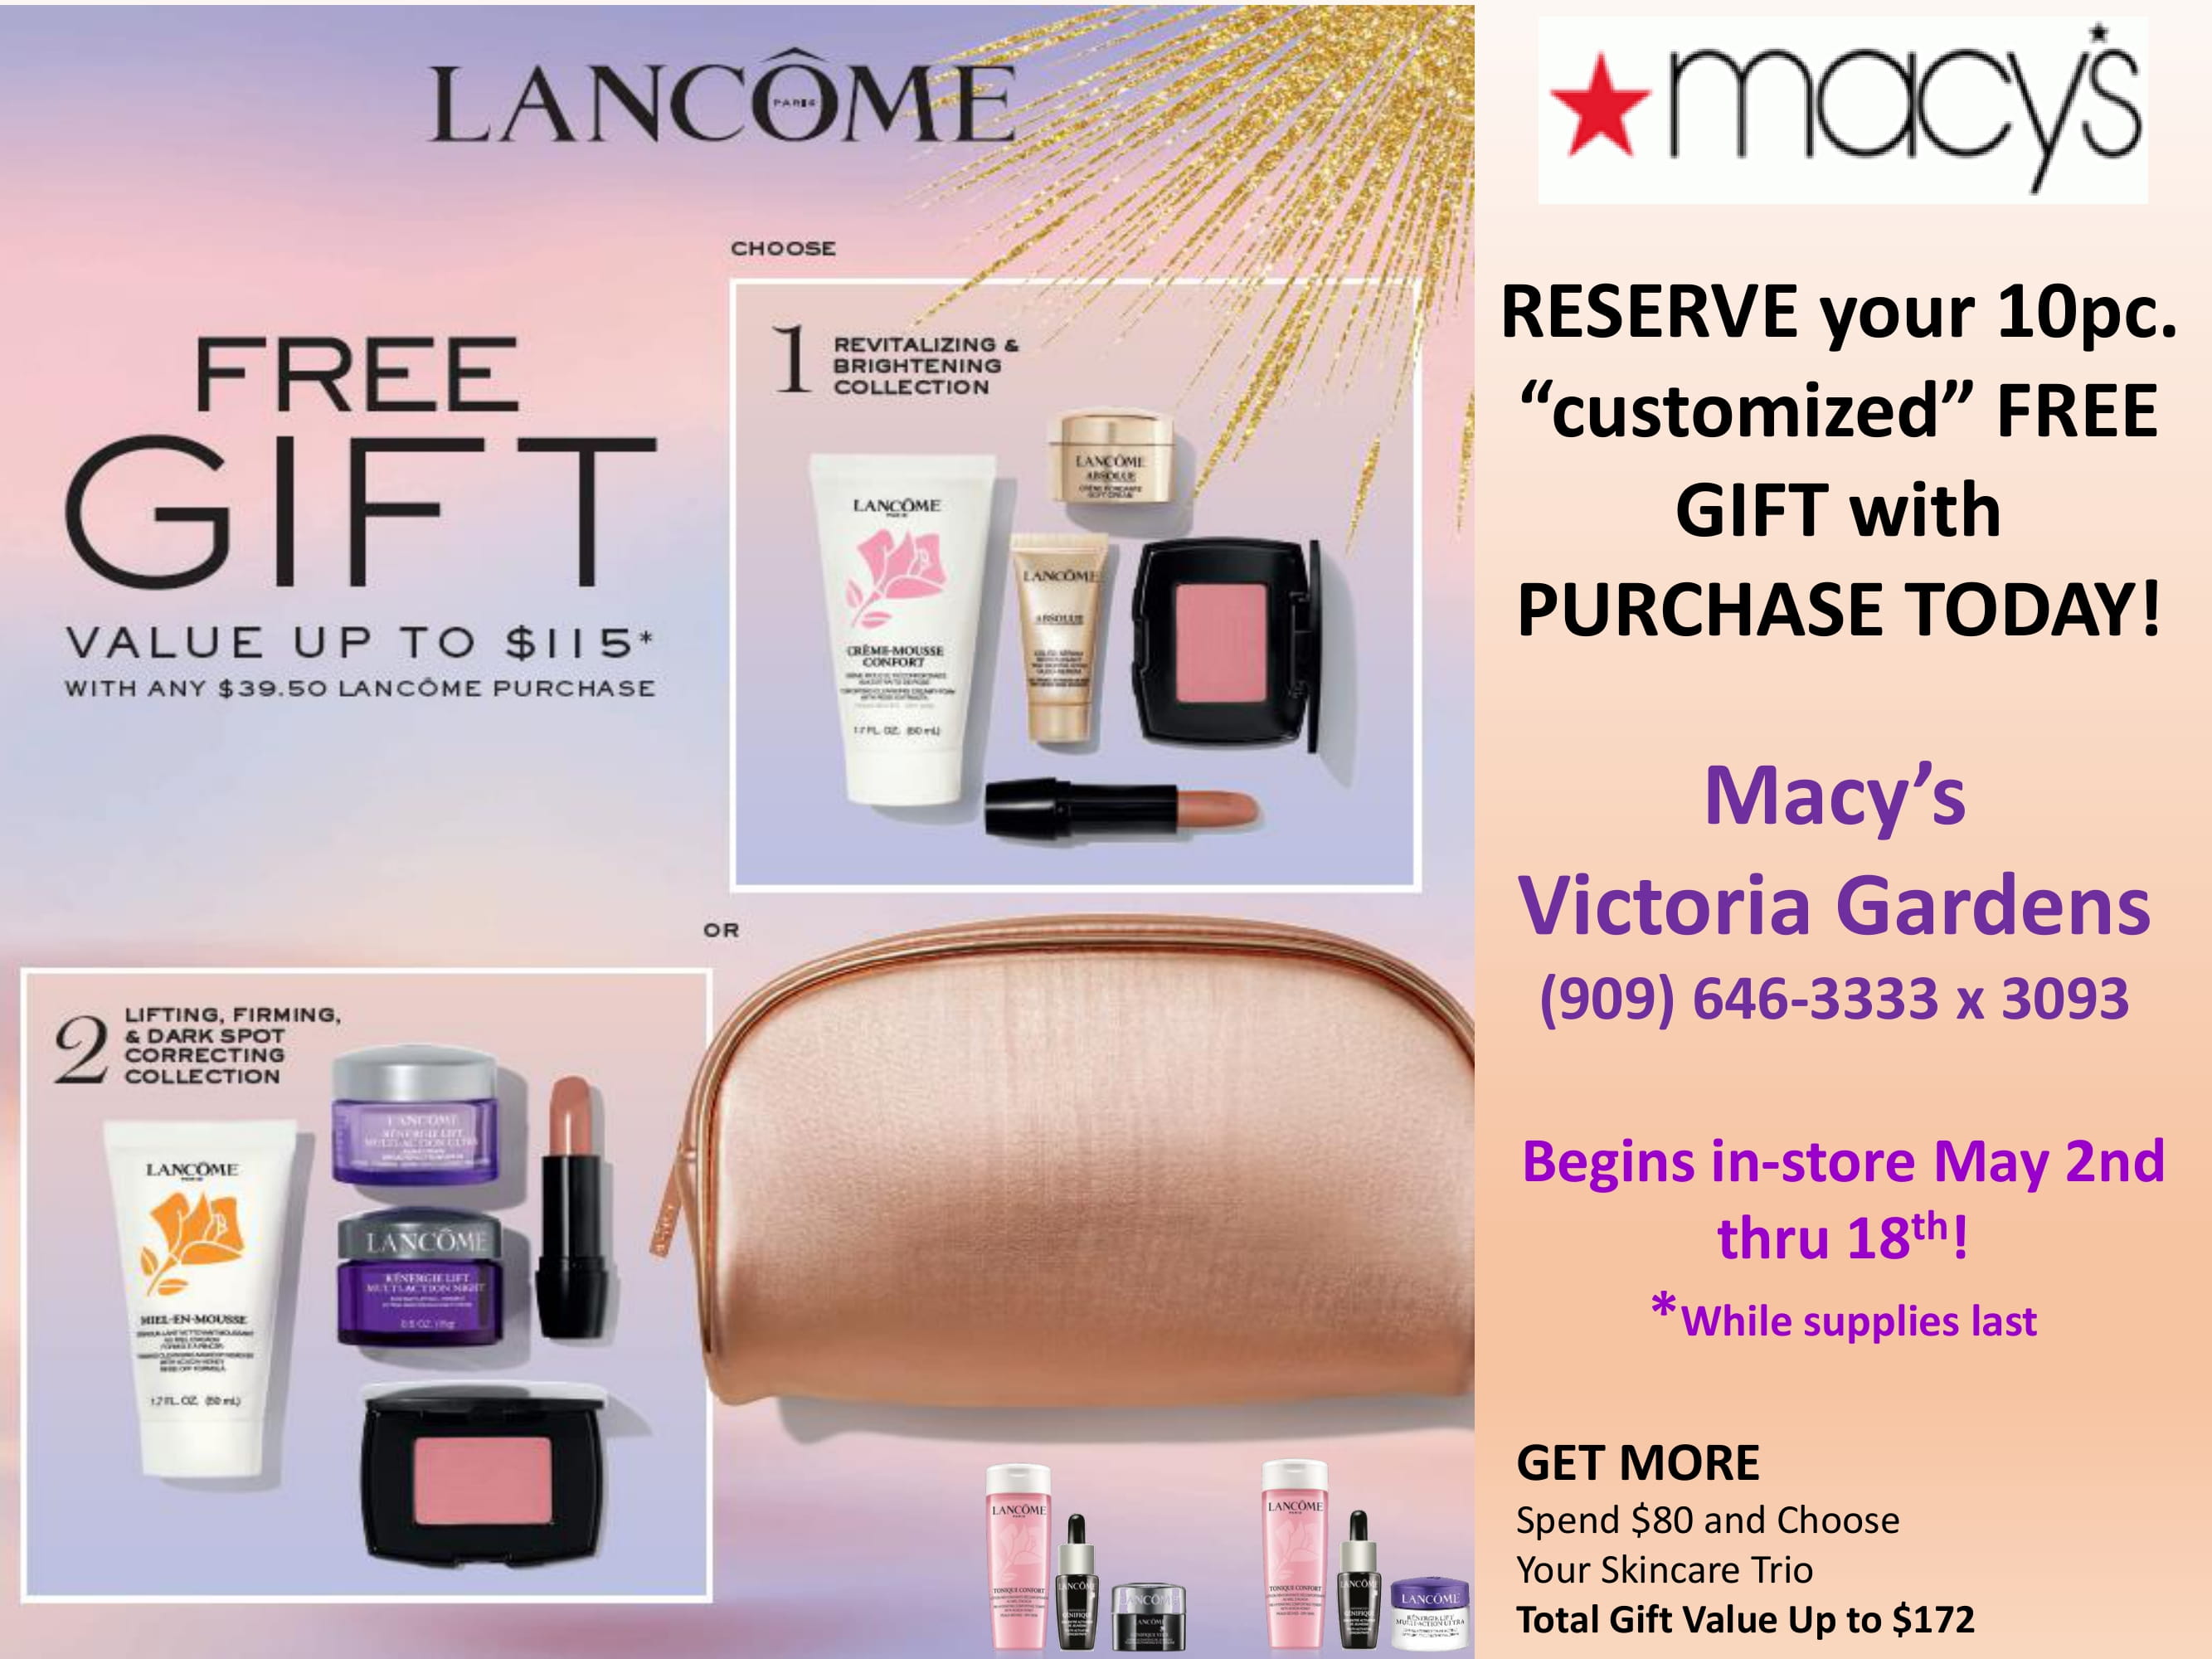 Lancome Event for Macy's from macy's